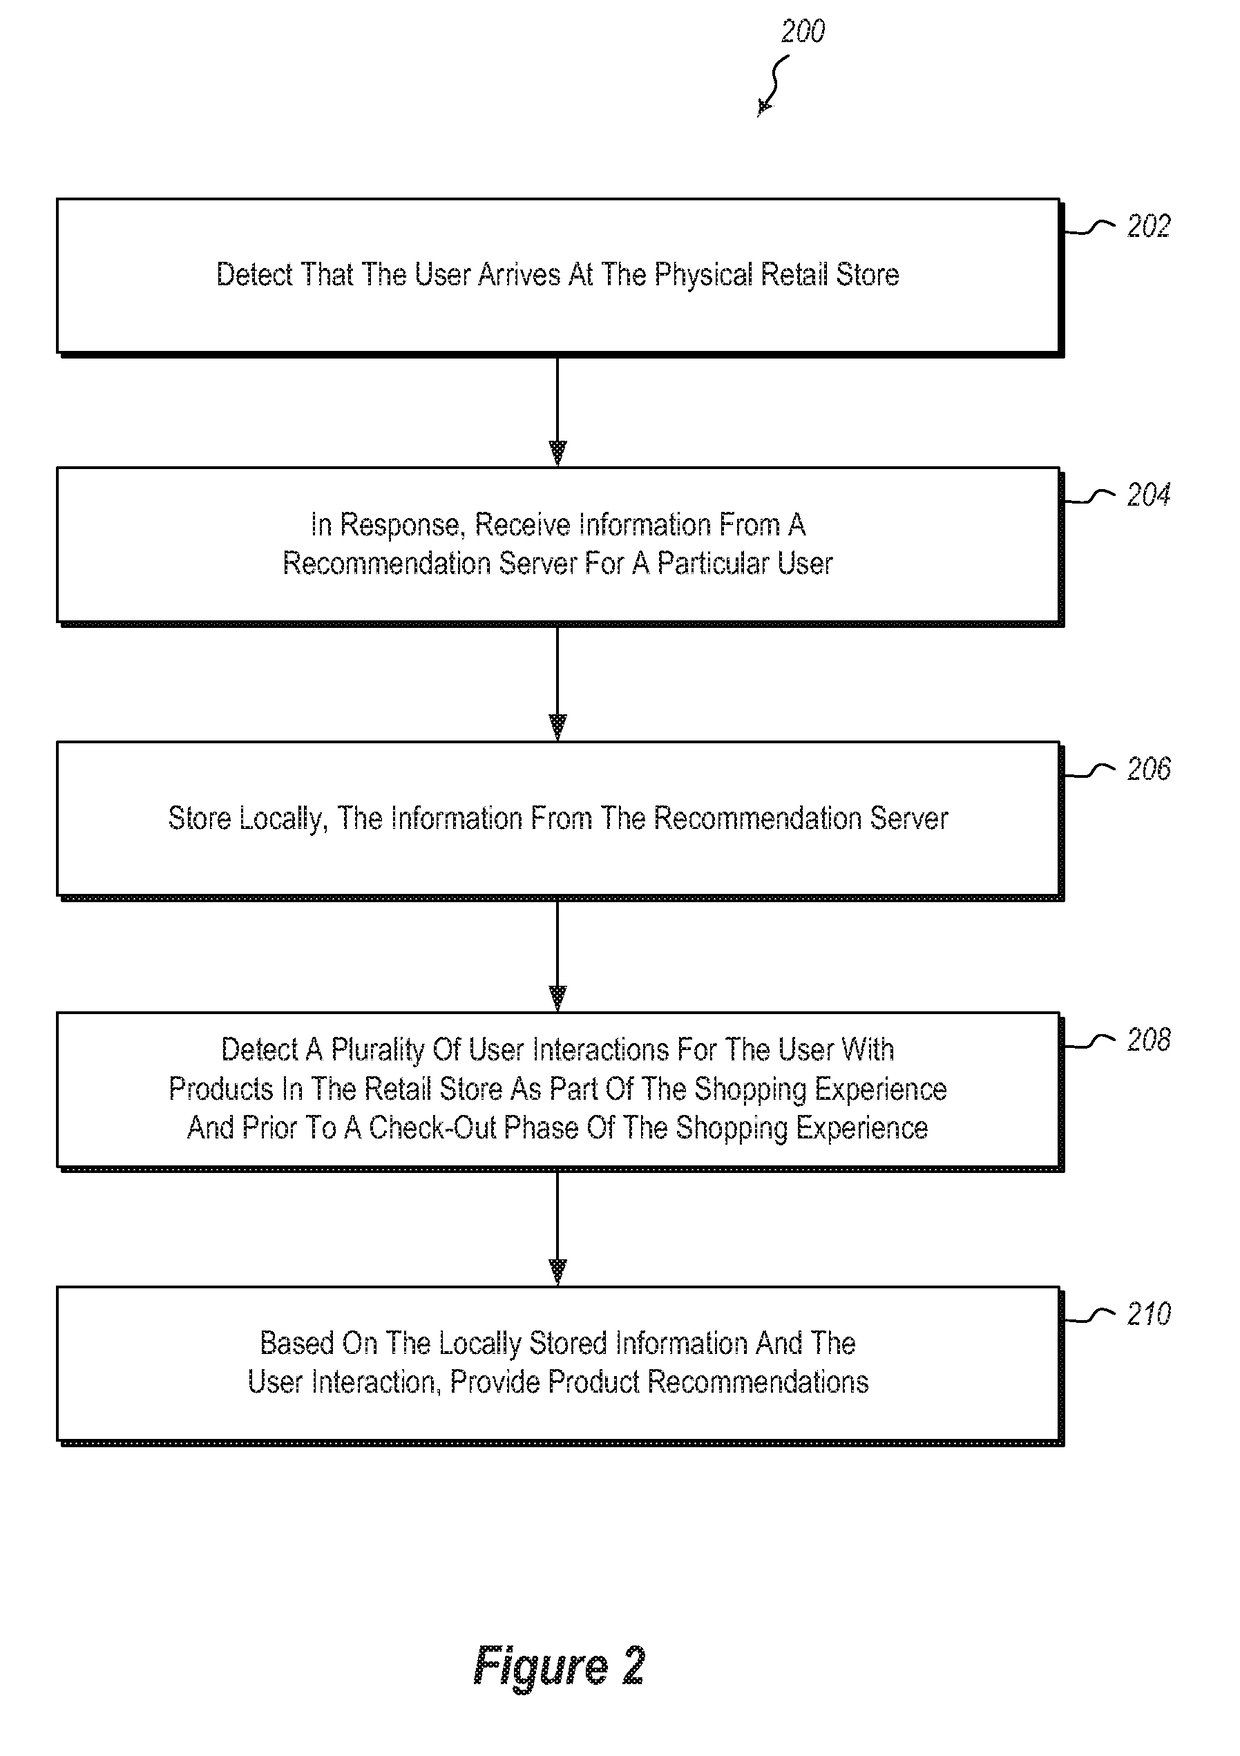 Context-Aware Personalized Recommender System for Physical Retail Stores